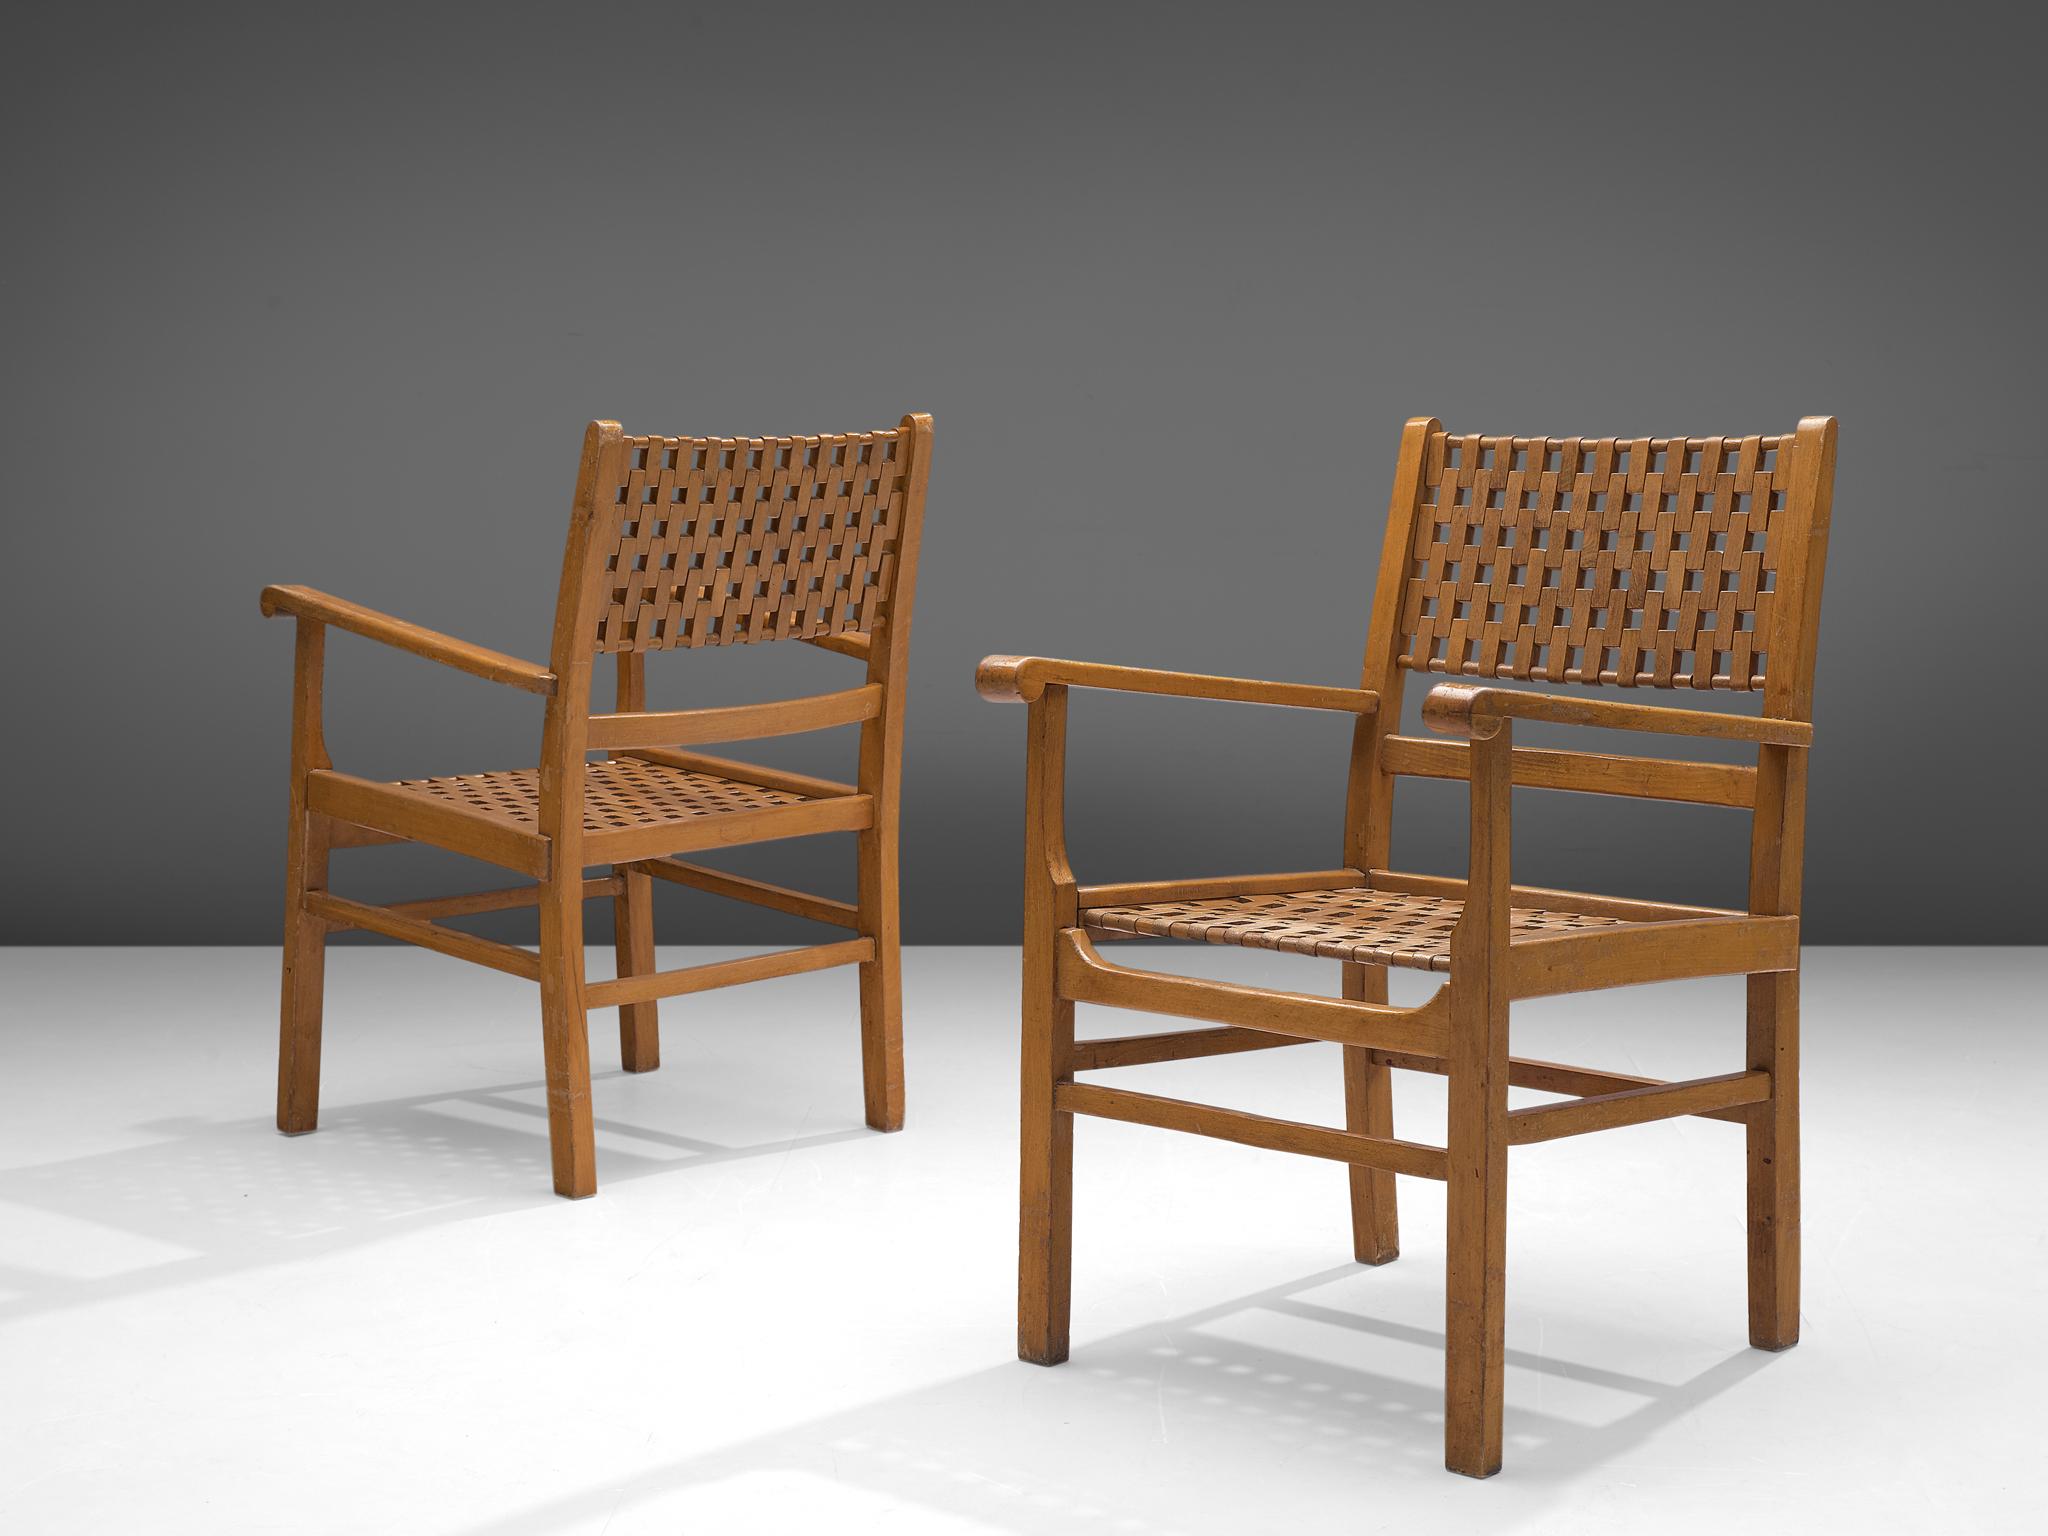 Two armchairs, beech, webbing, Germany, 1930s.

This German set is executed with bent plywood and solid wooden seat with a webbed back. The style is typical for pre-war German design. Playful, bold lines and experimental material. The chairs are